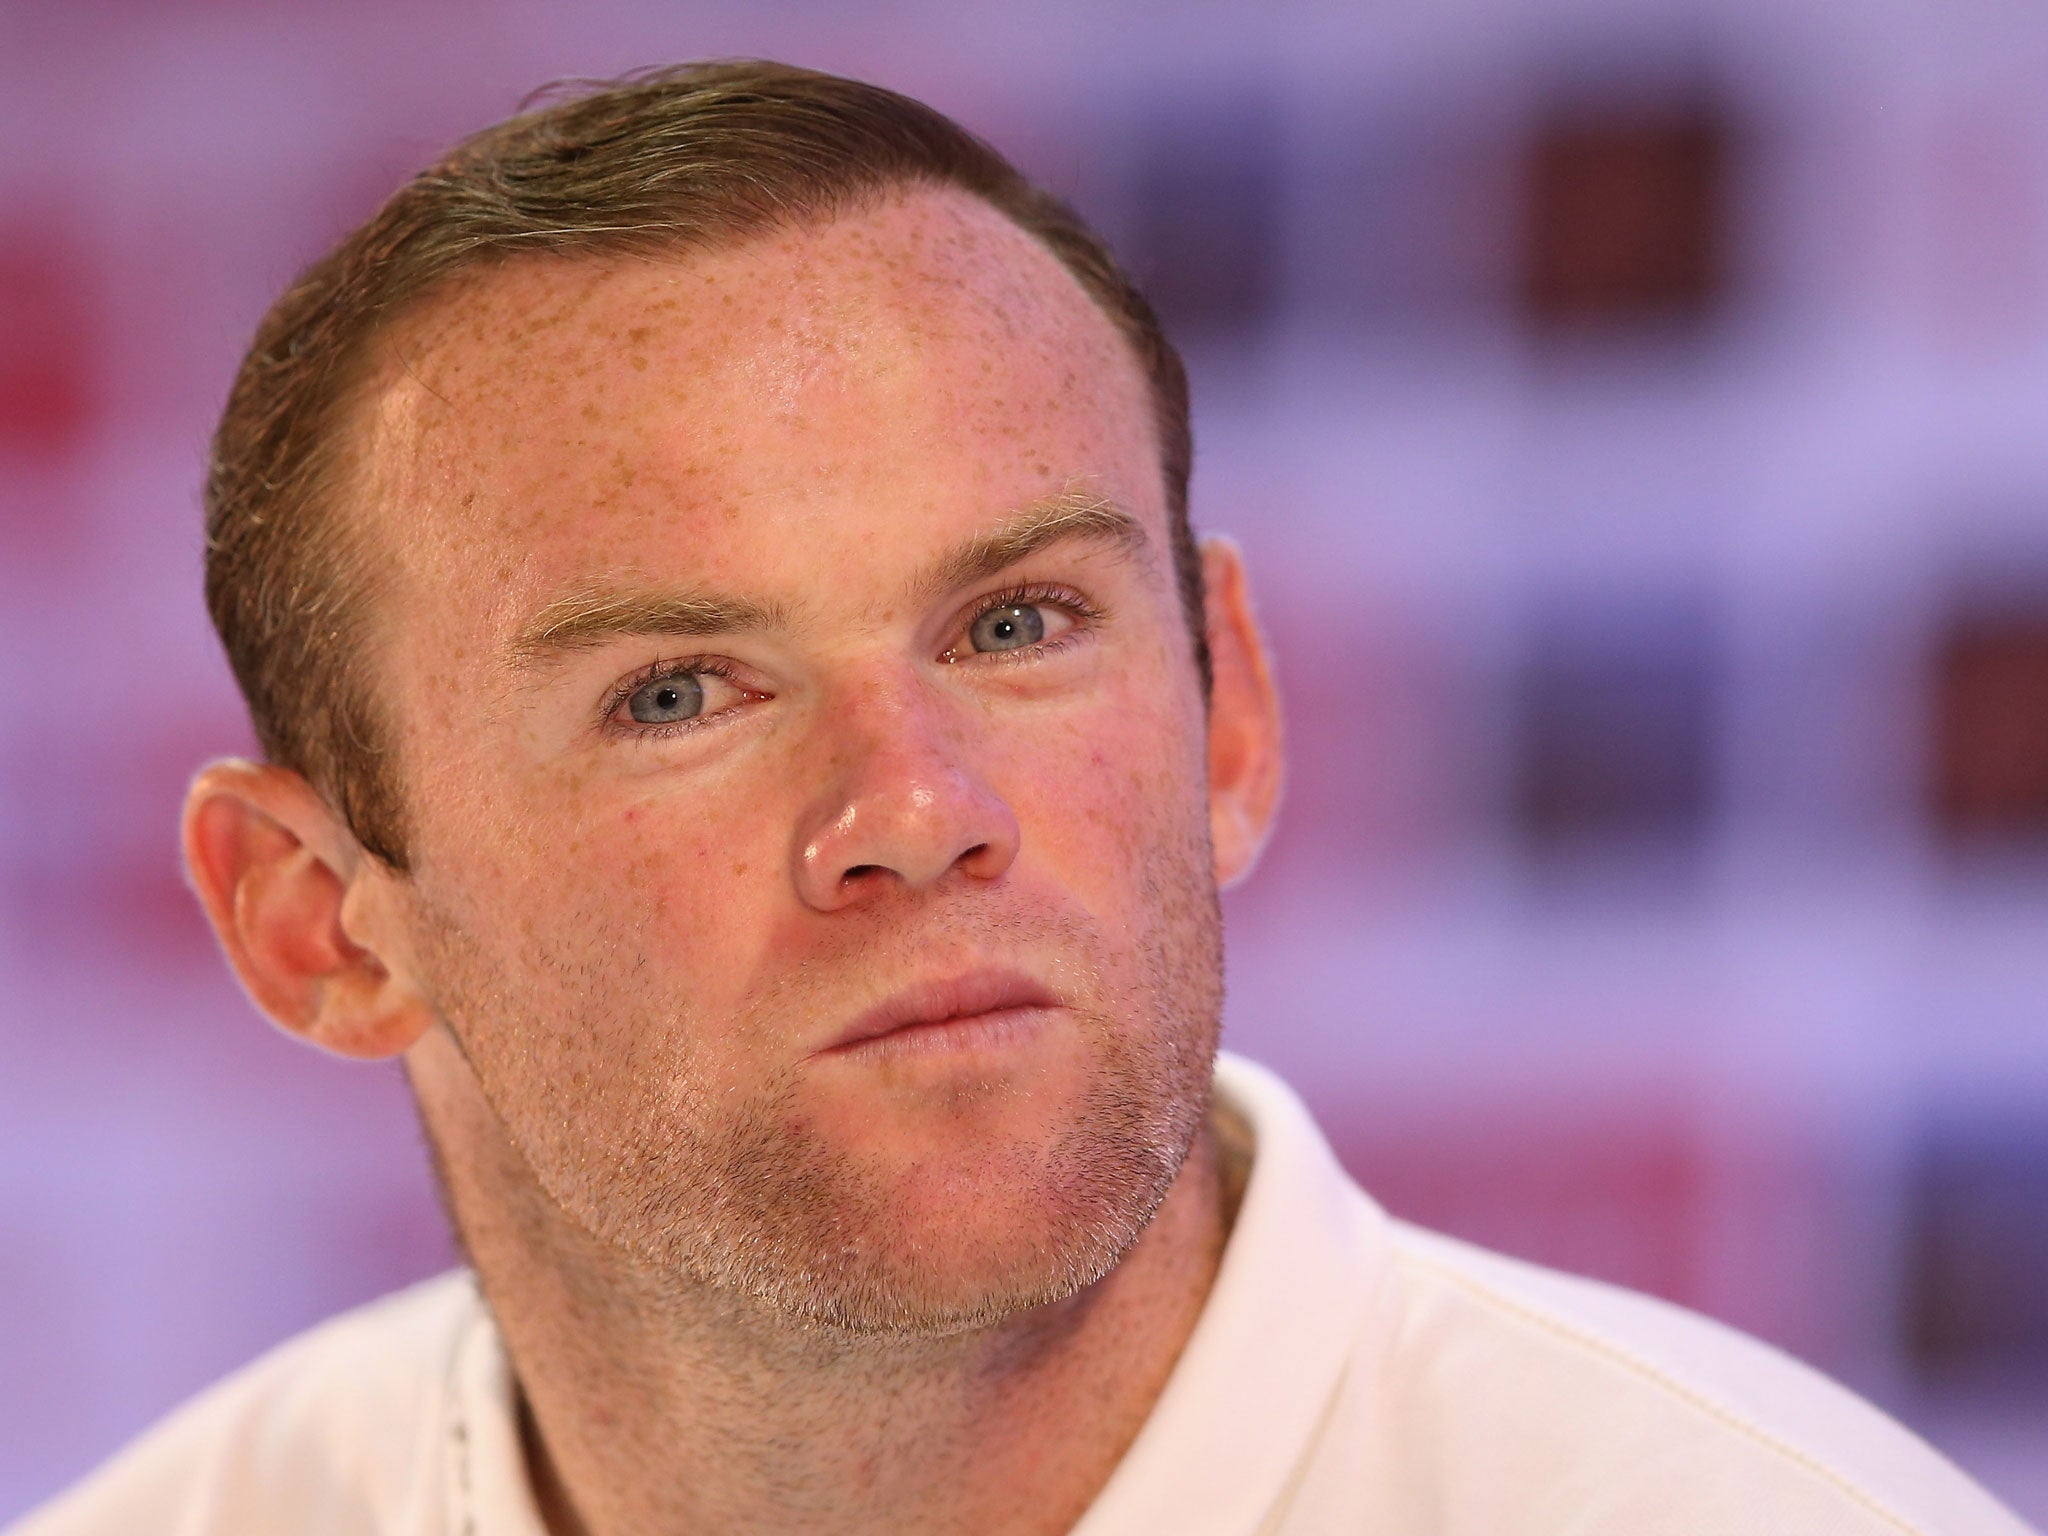 Wayne Rooney talks to the media during a press conference